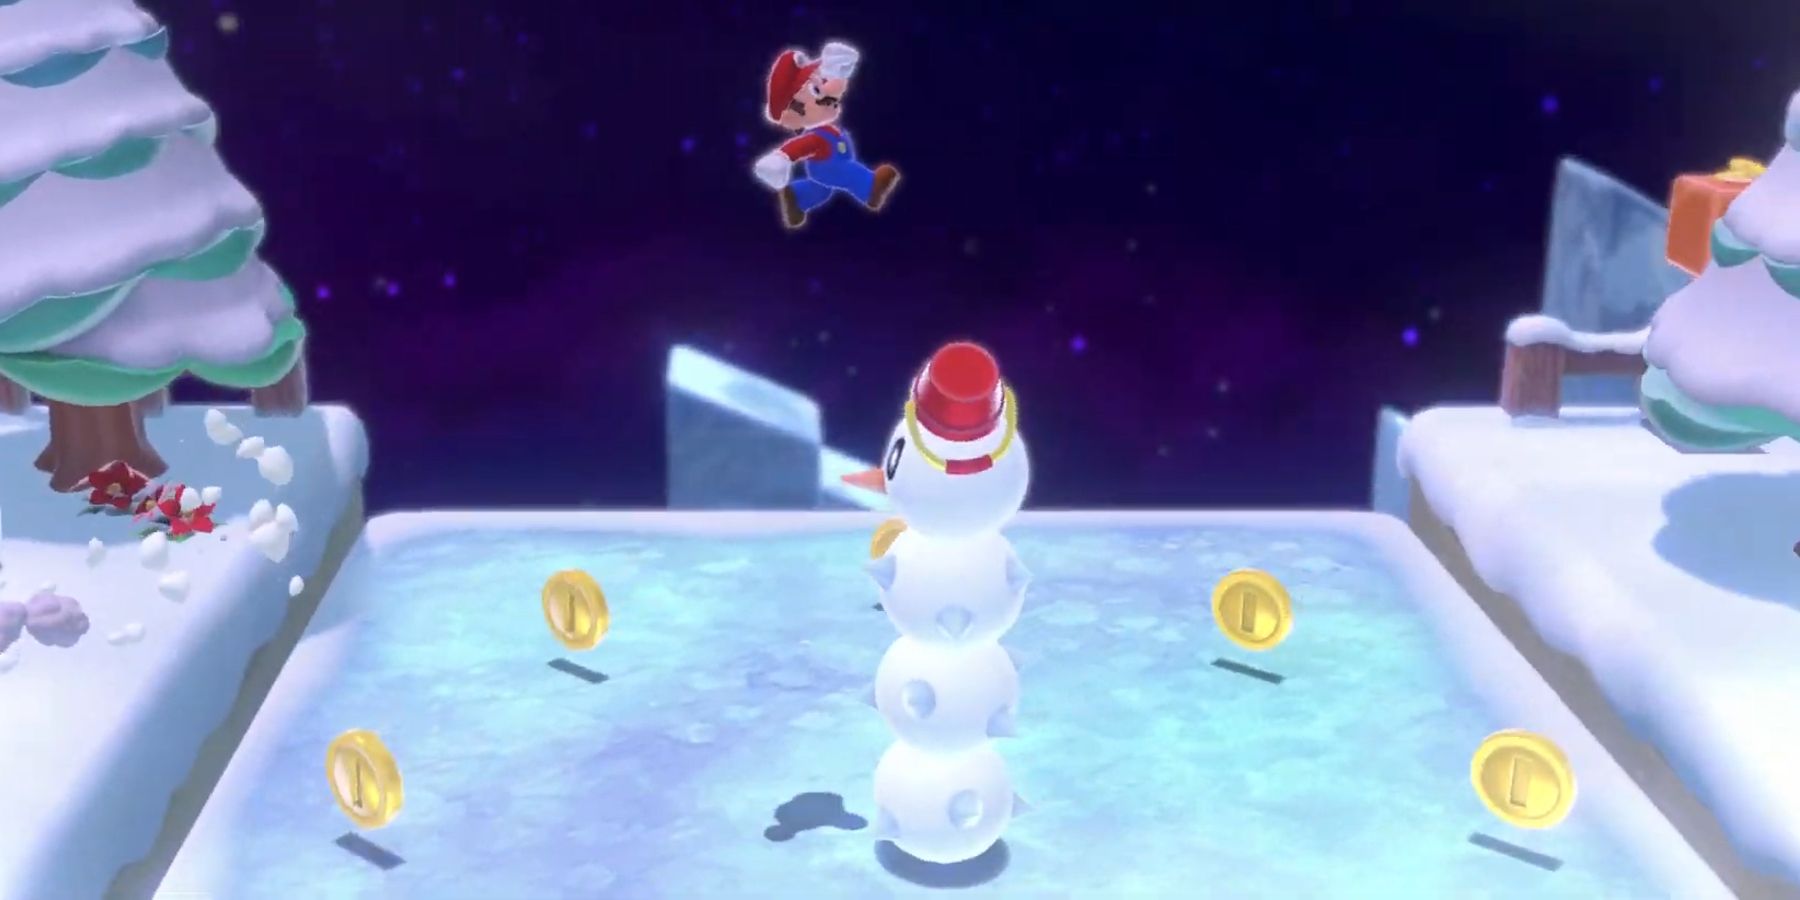 Mario leaping over a Snow Pokey in Snowball Park of Super Mario 3D World